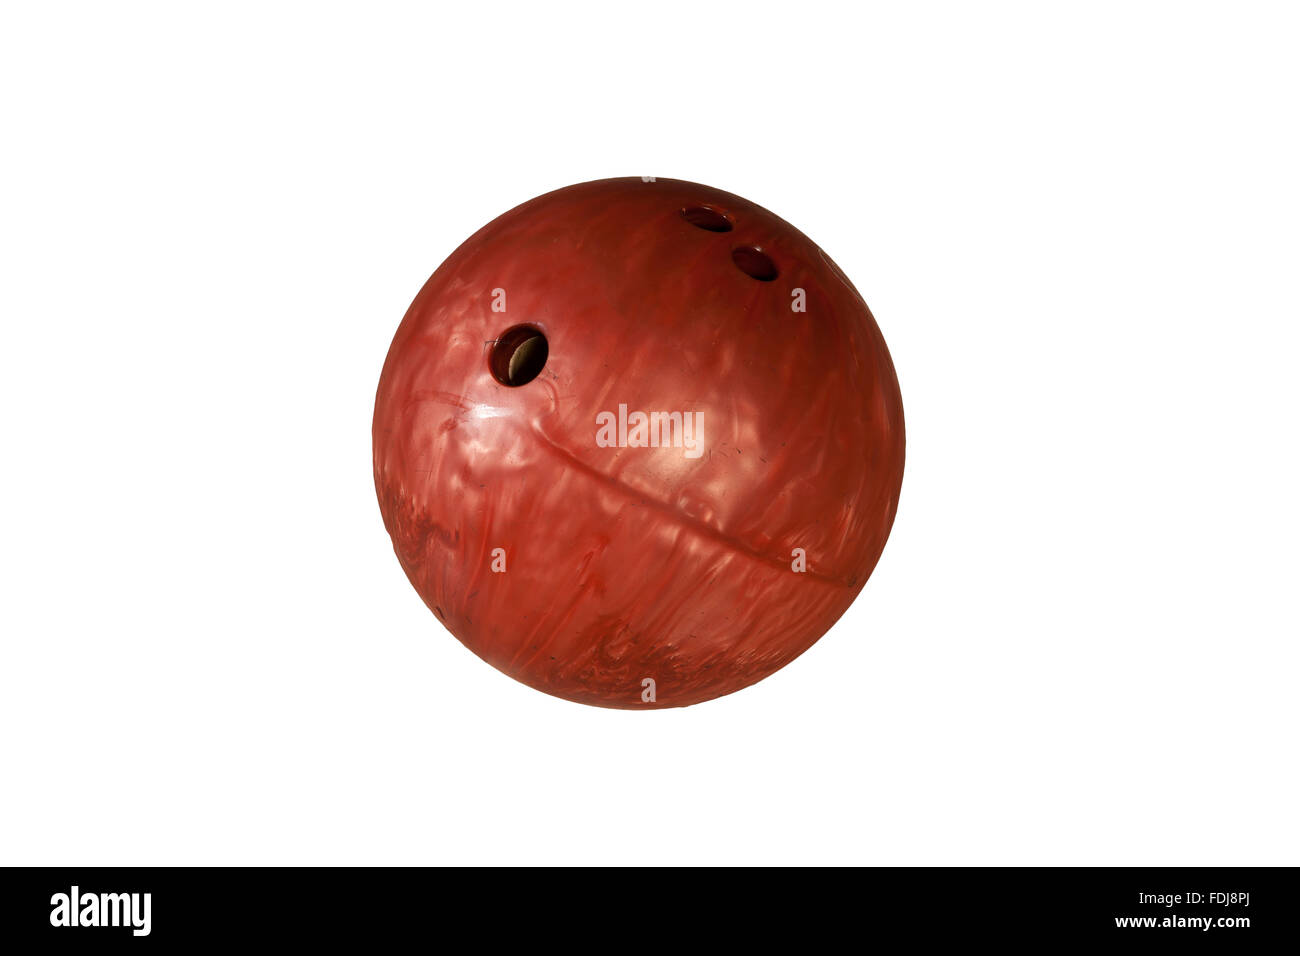 Isolated bowling ball on a white background Stock Photo